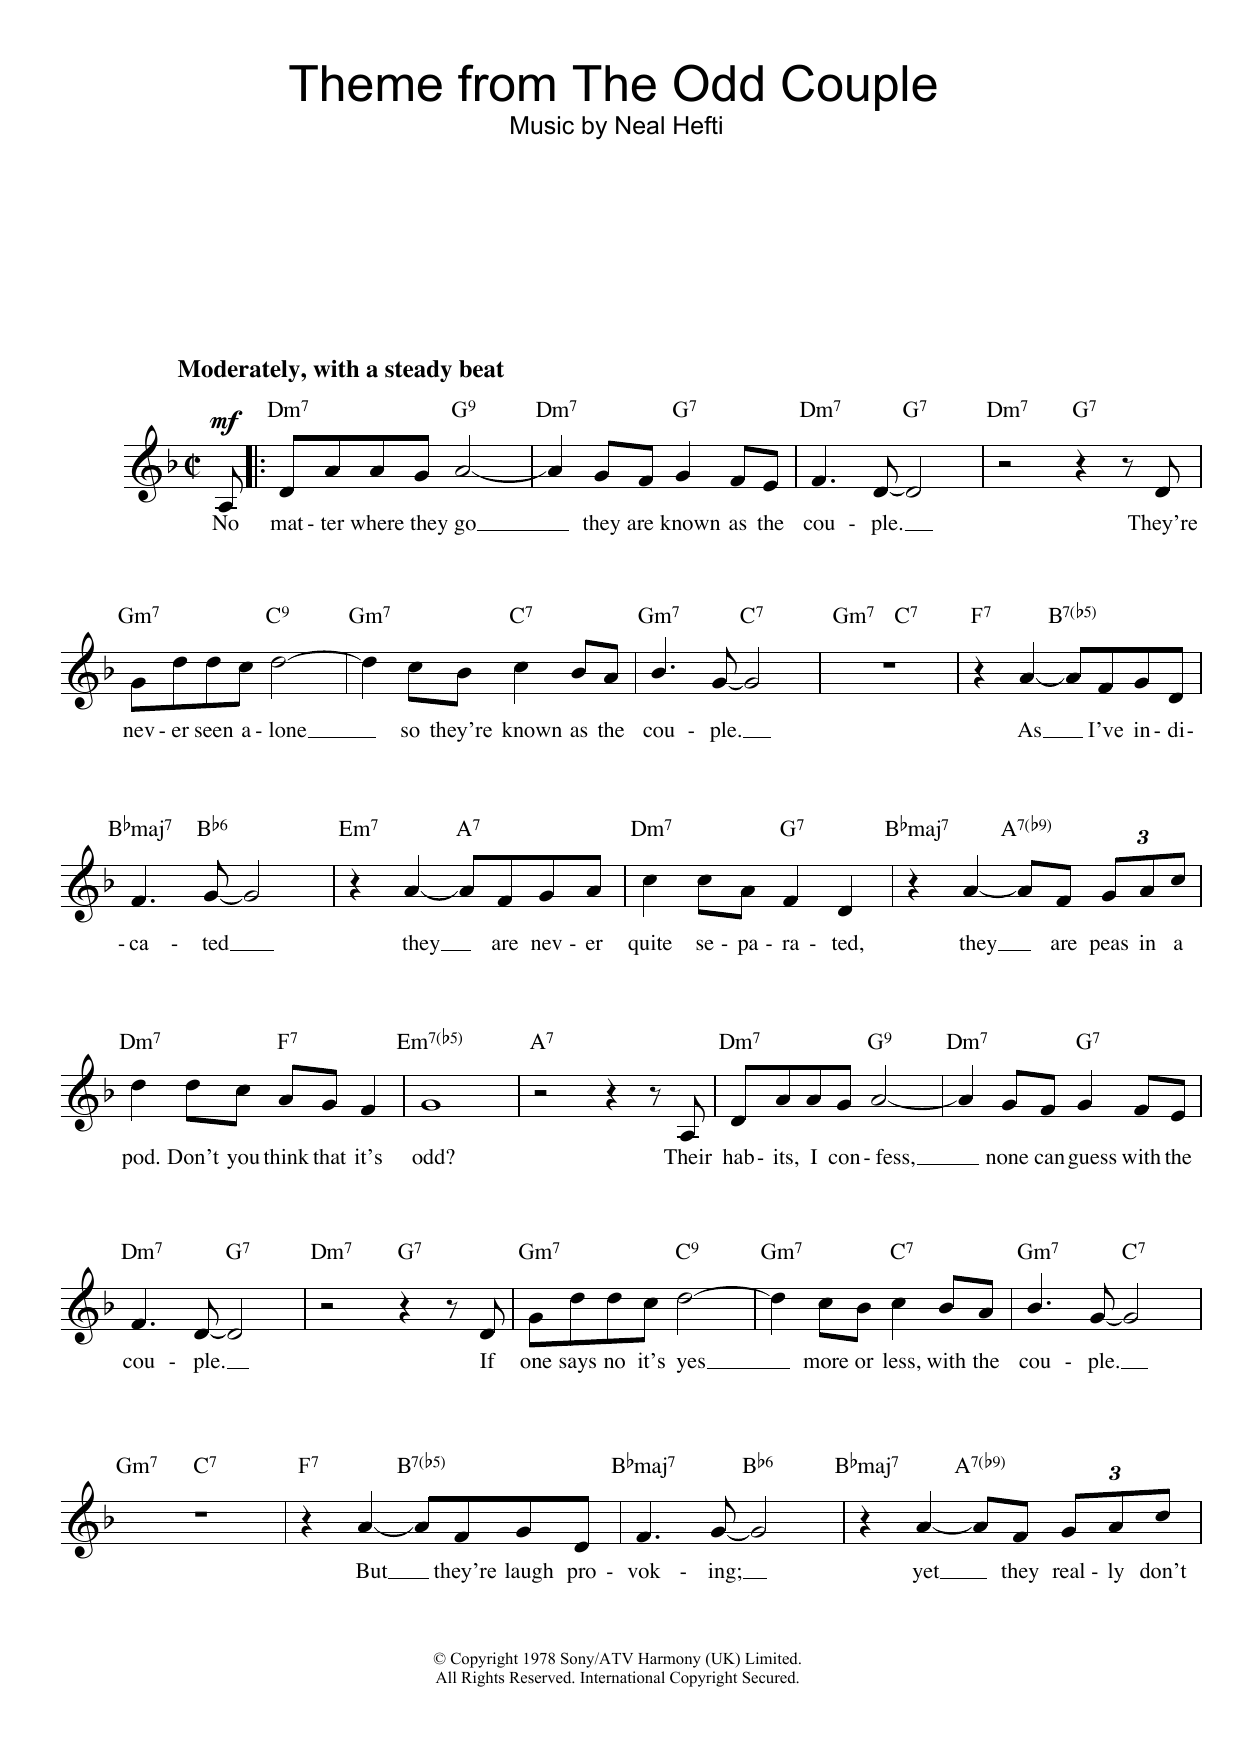 Neal Hefti Theme from The Odd Couple sheet music notes printable PDF score